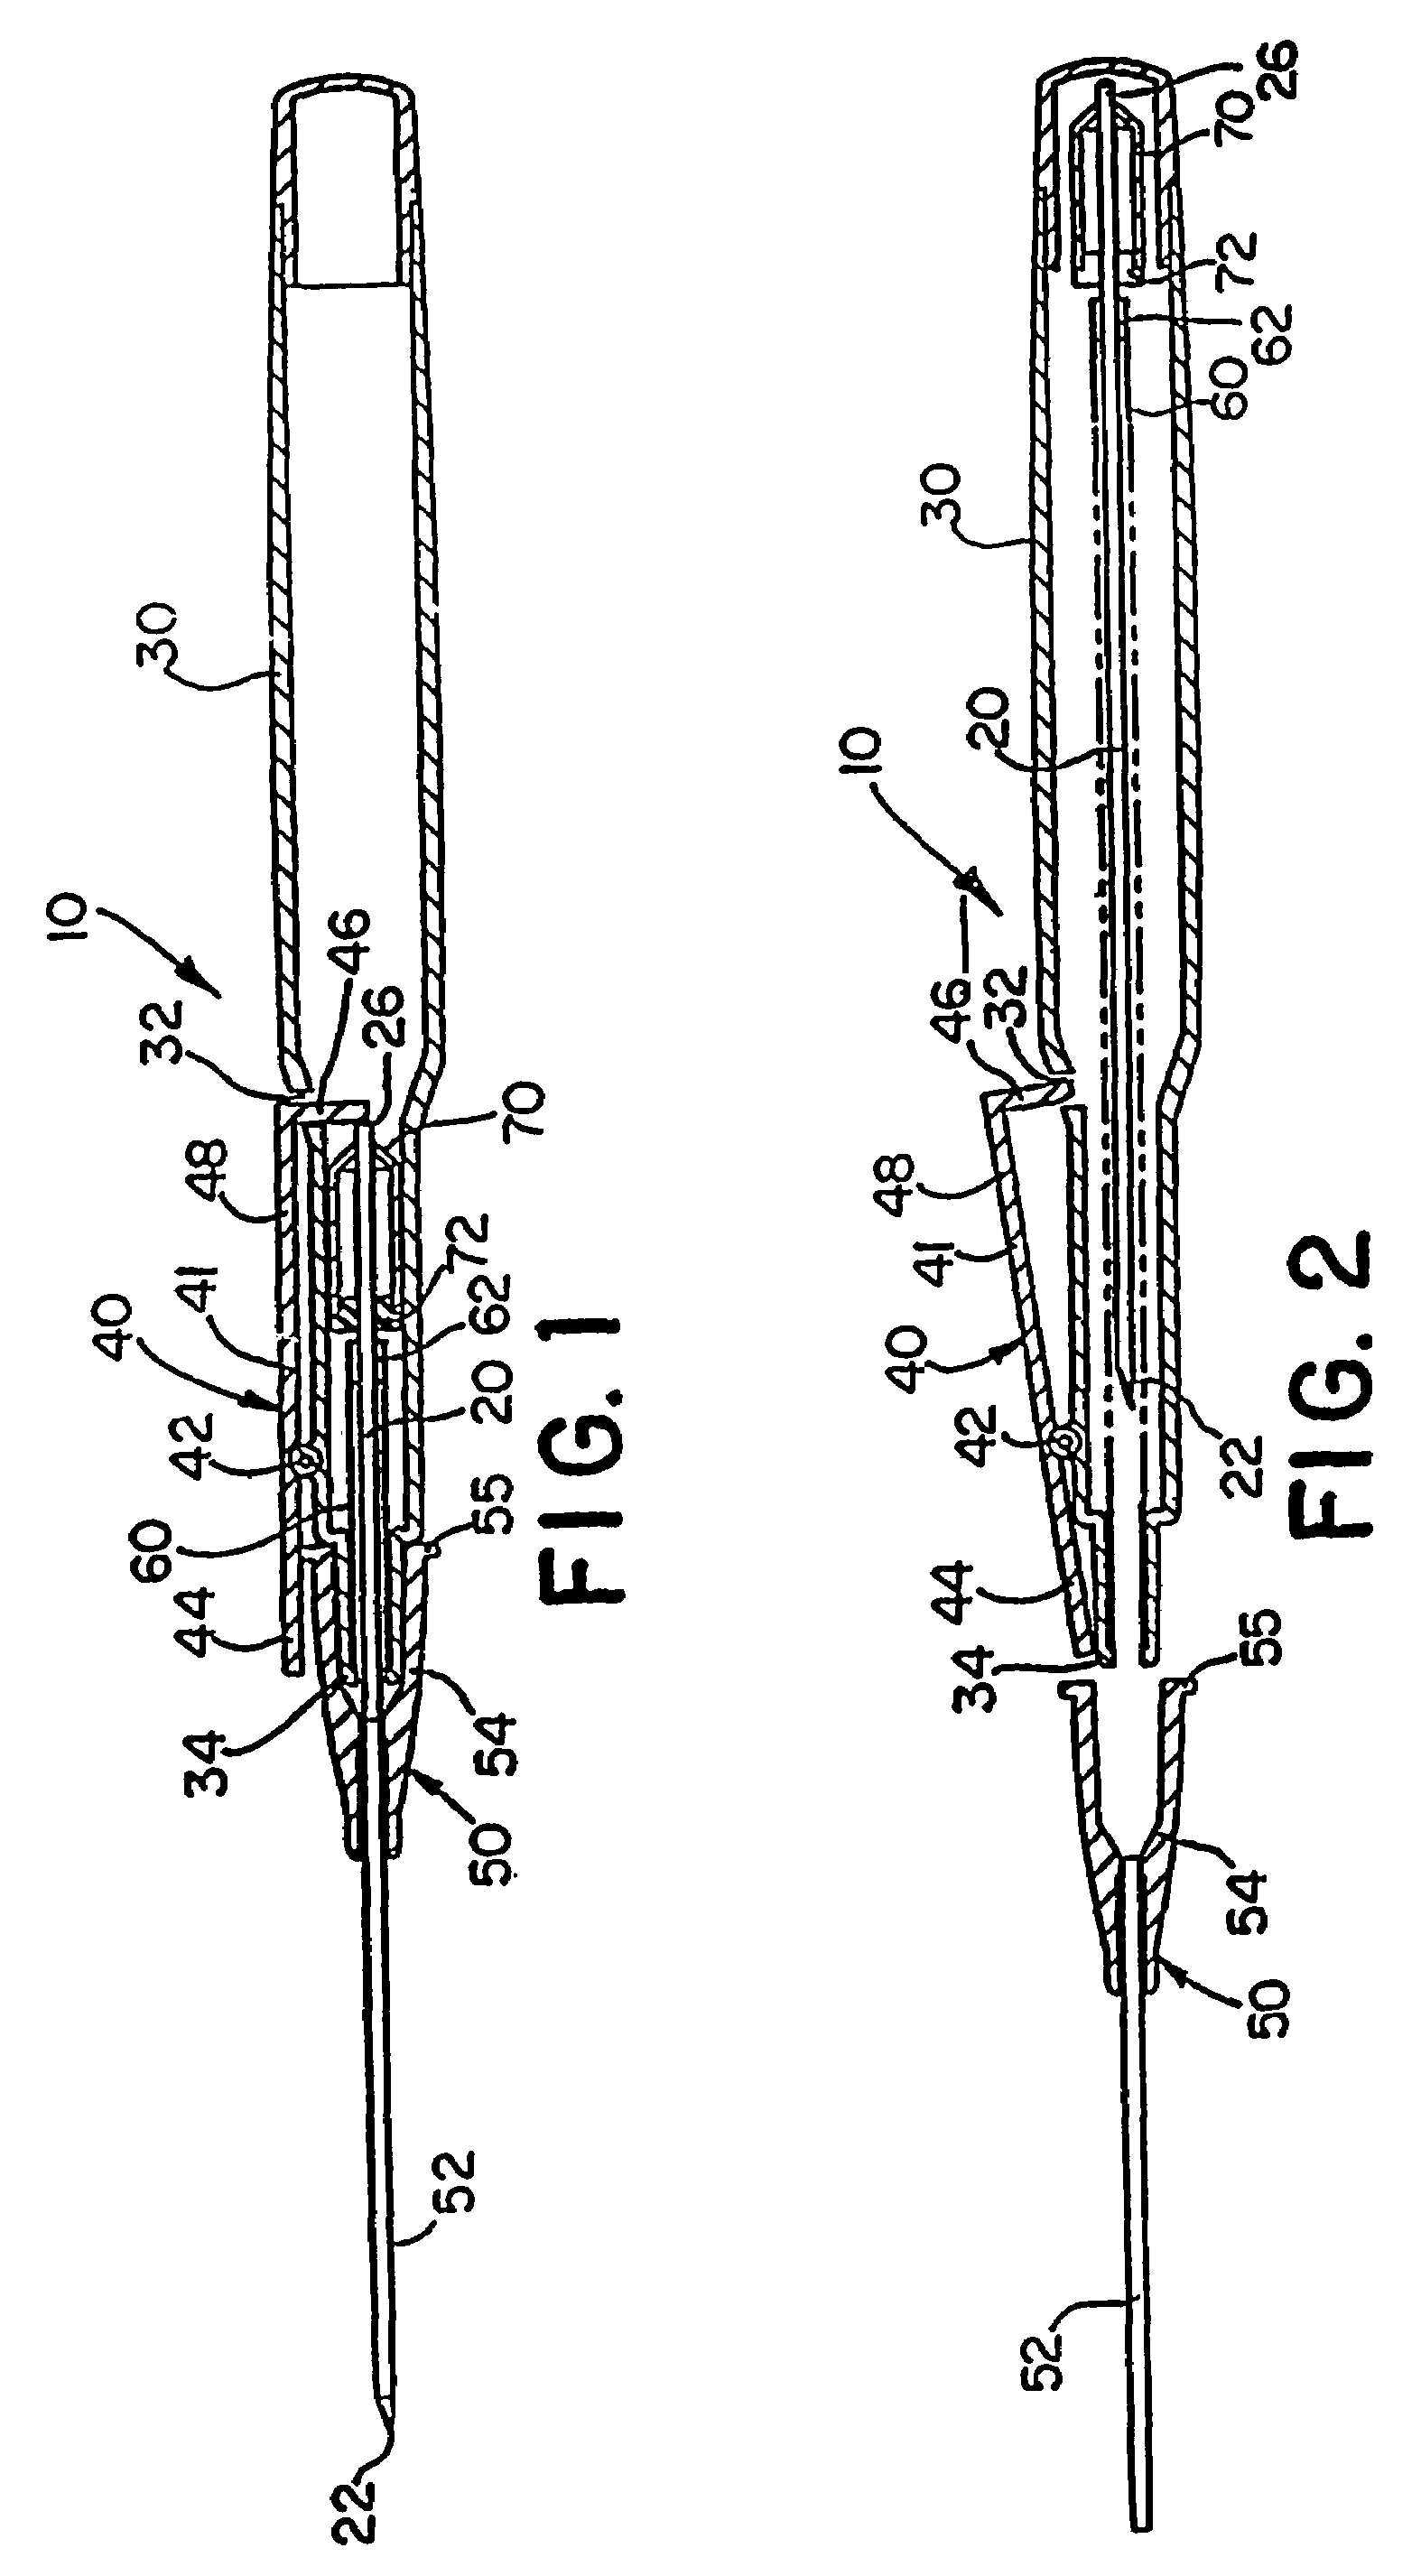 Catheter insertion device with retractable needle